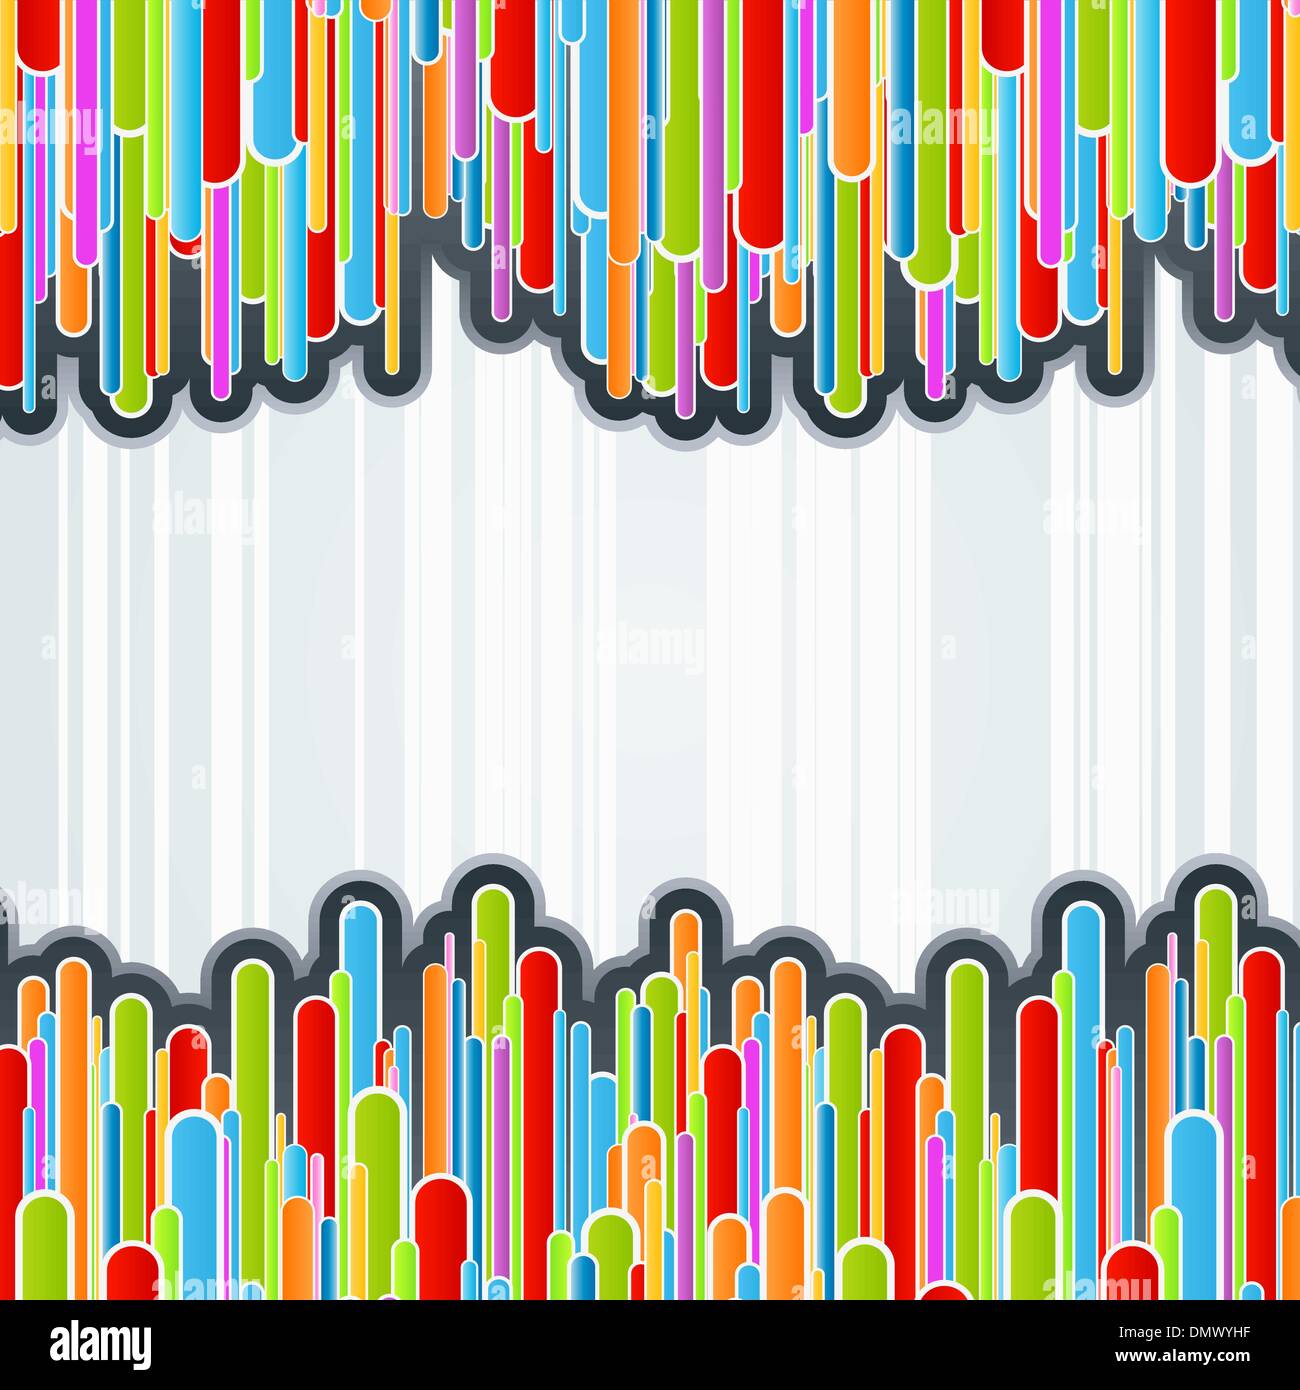 Colorful columns background Stock Vector